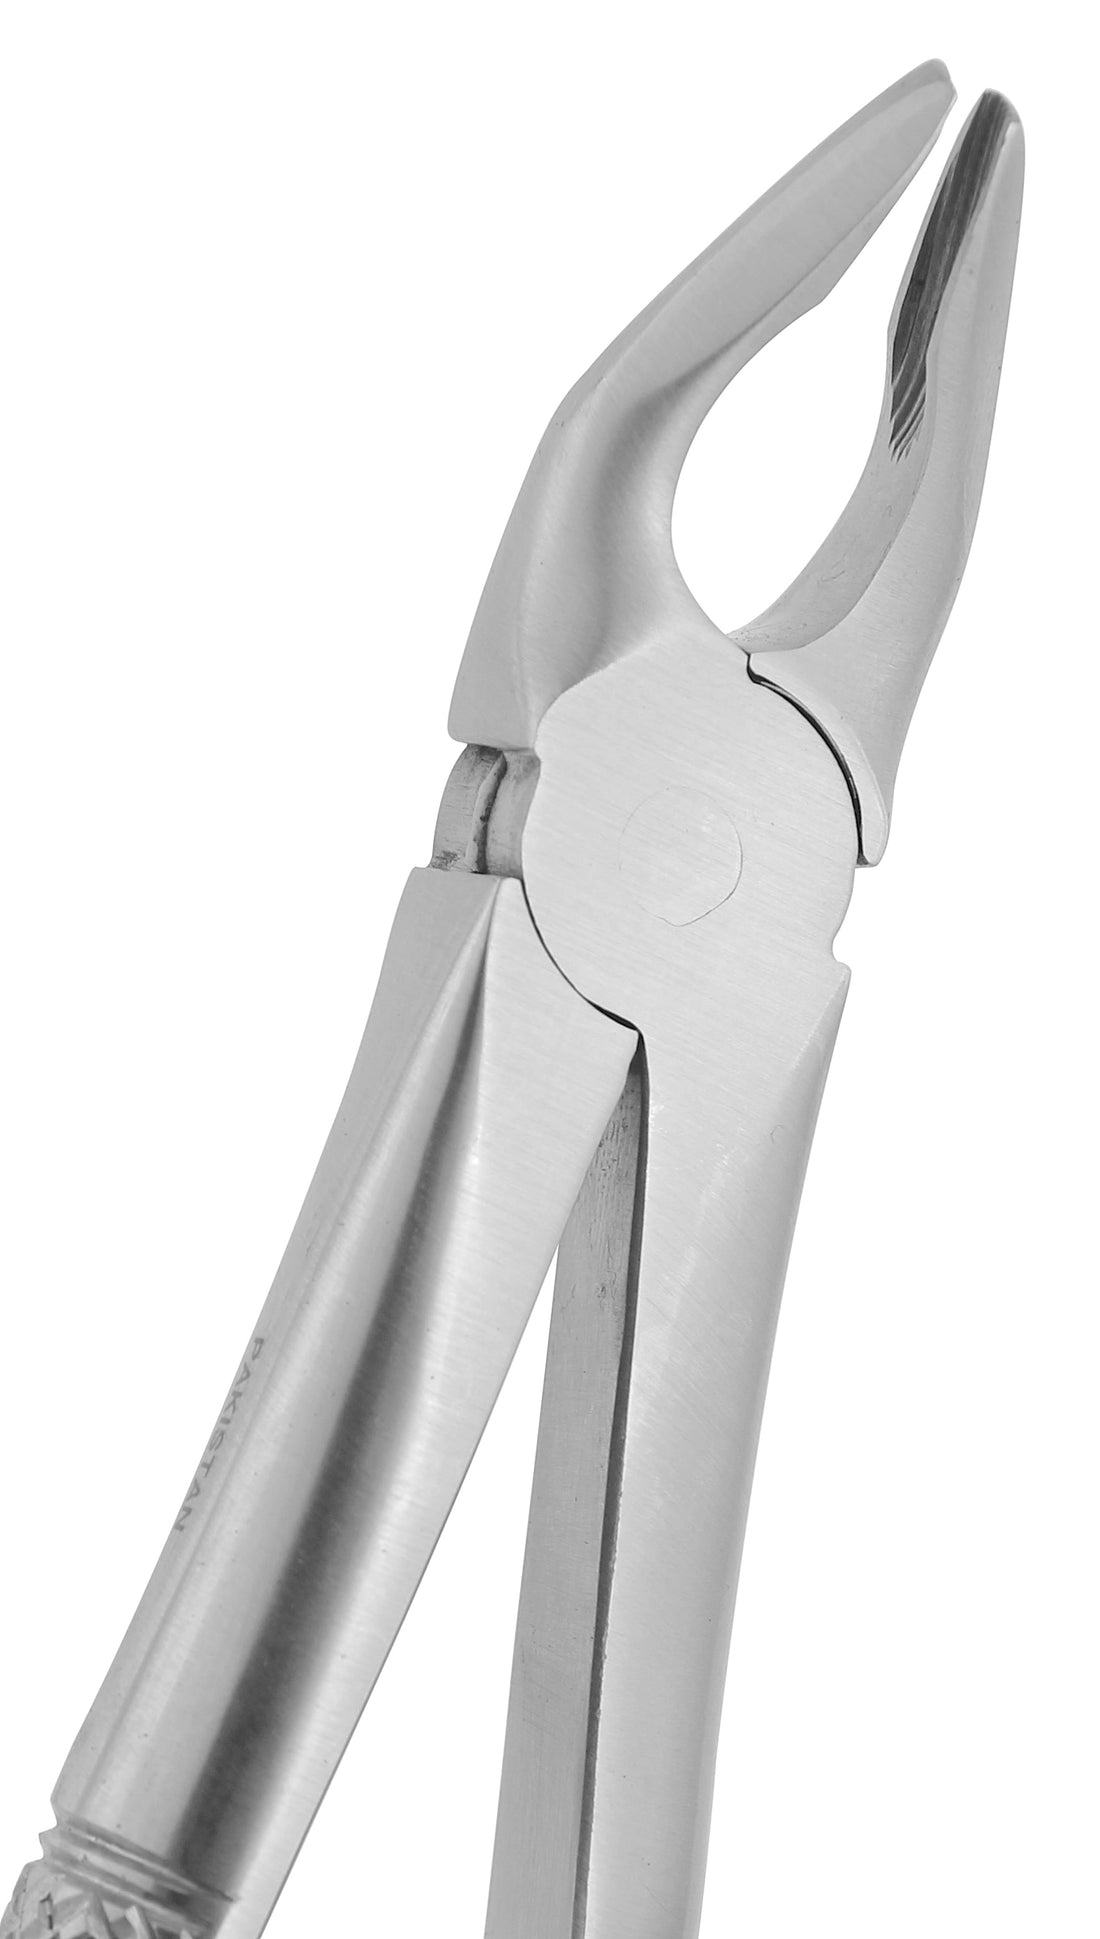 Extraction Forceps 035